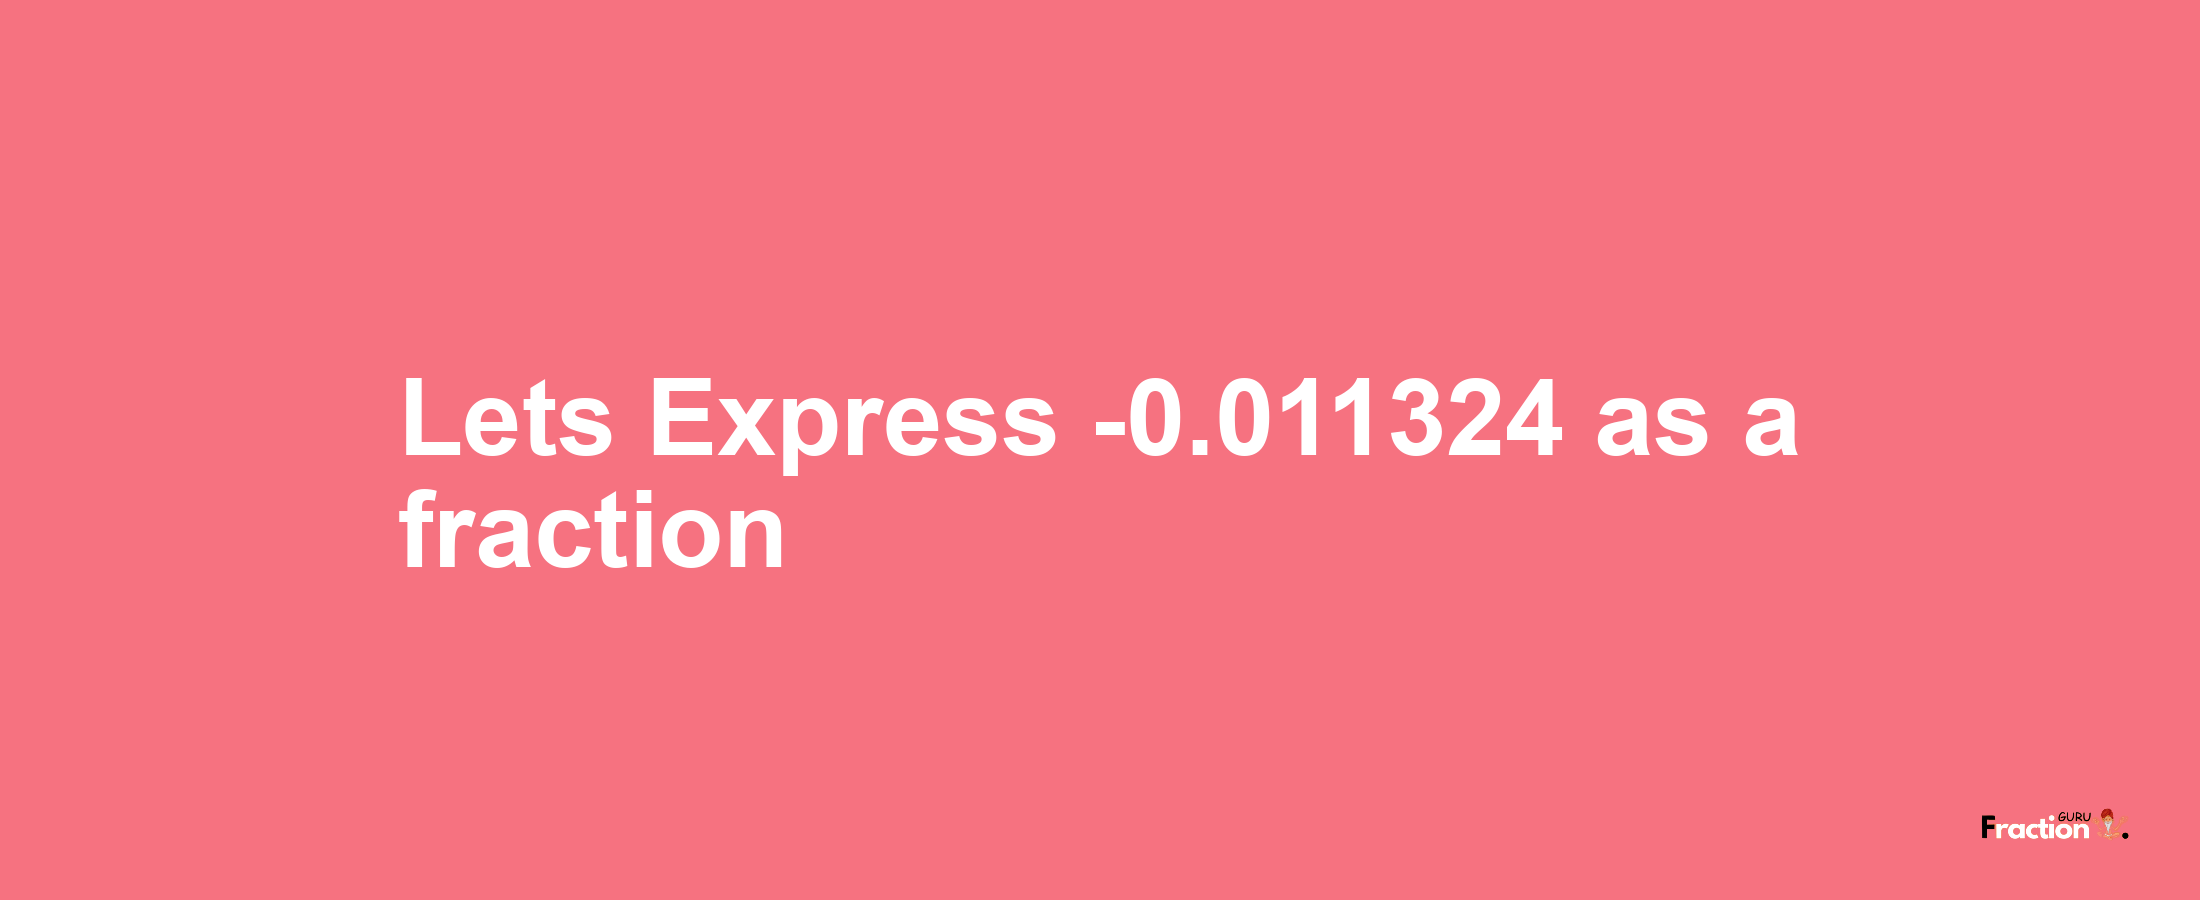 Lets Express -0.011324 as afraction